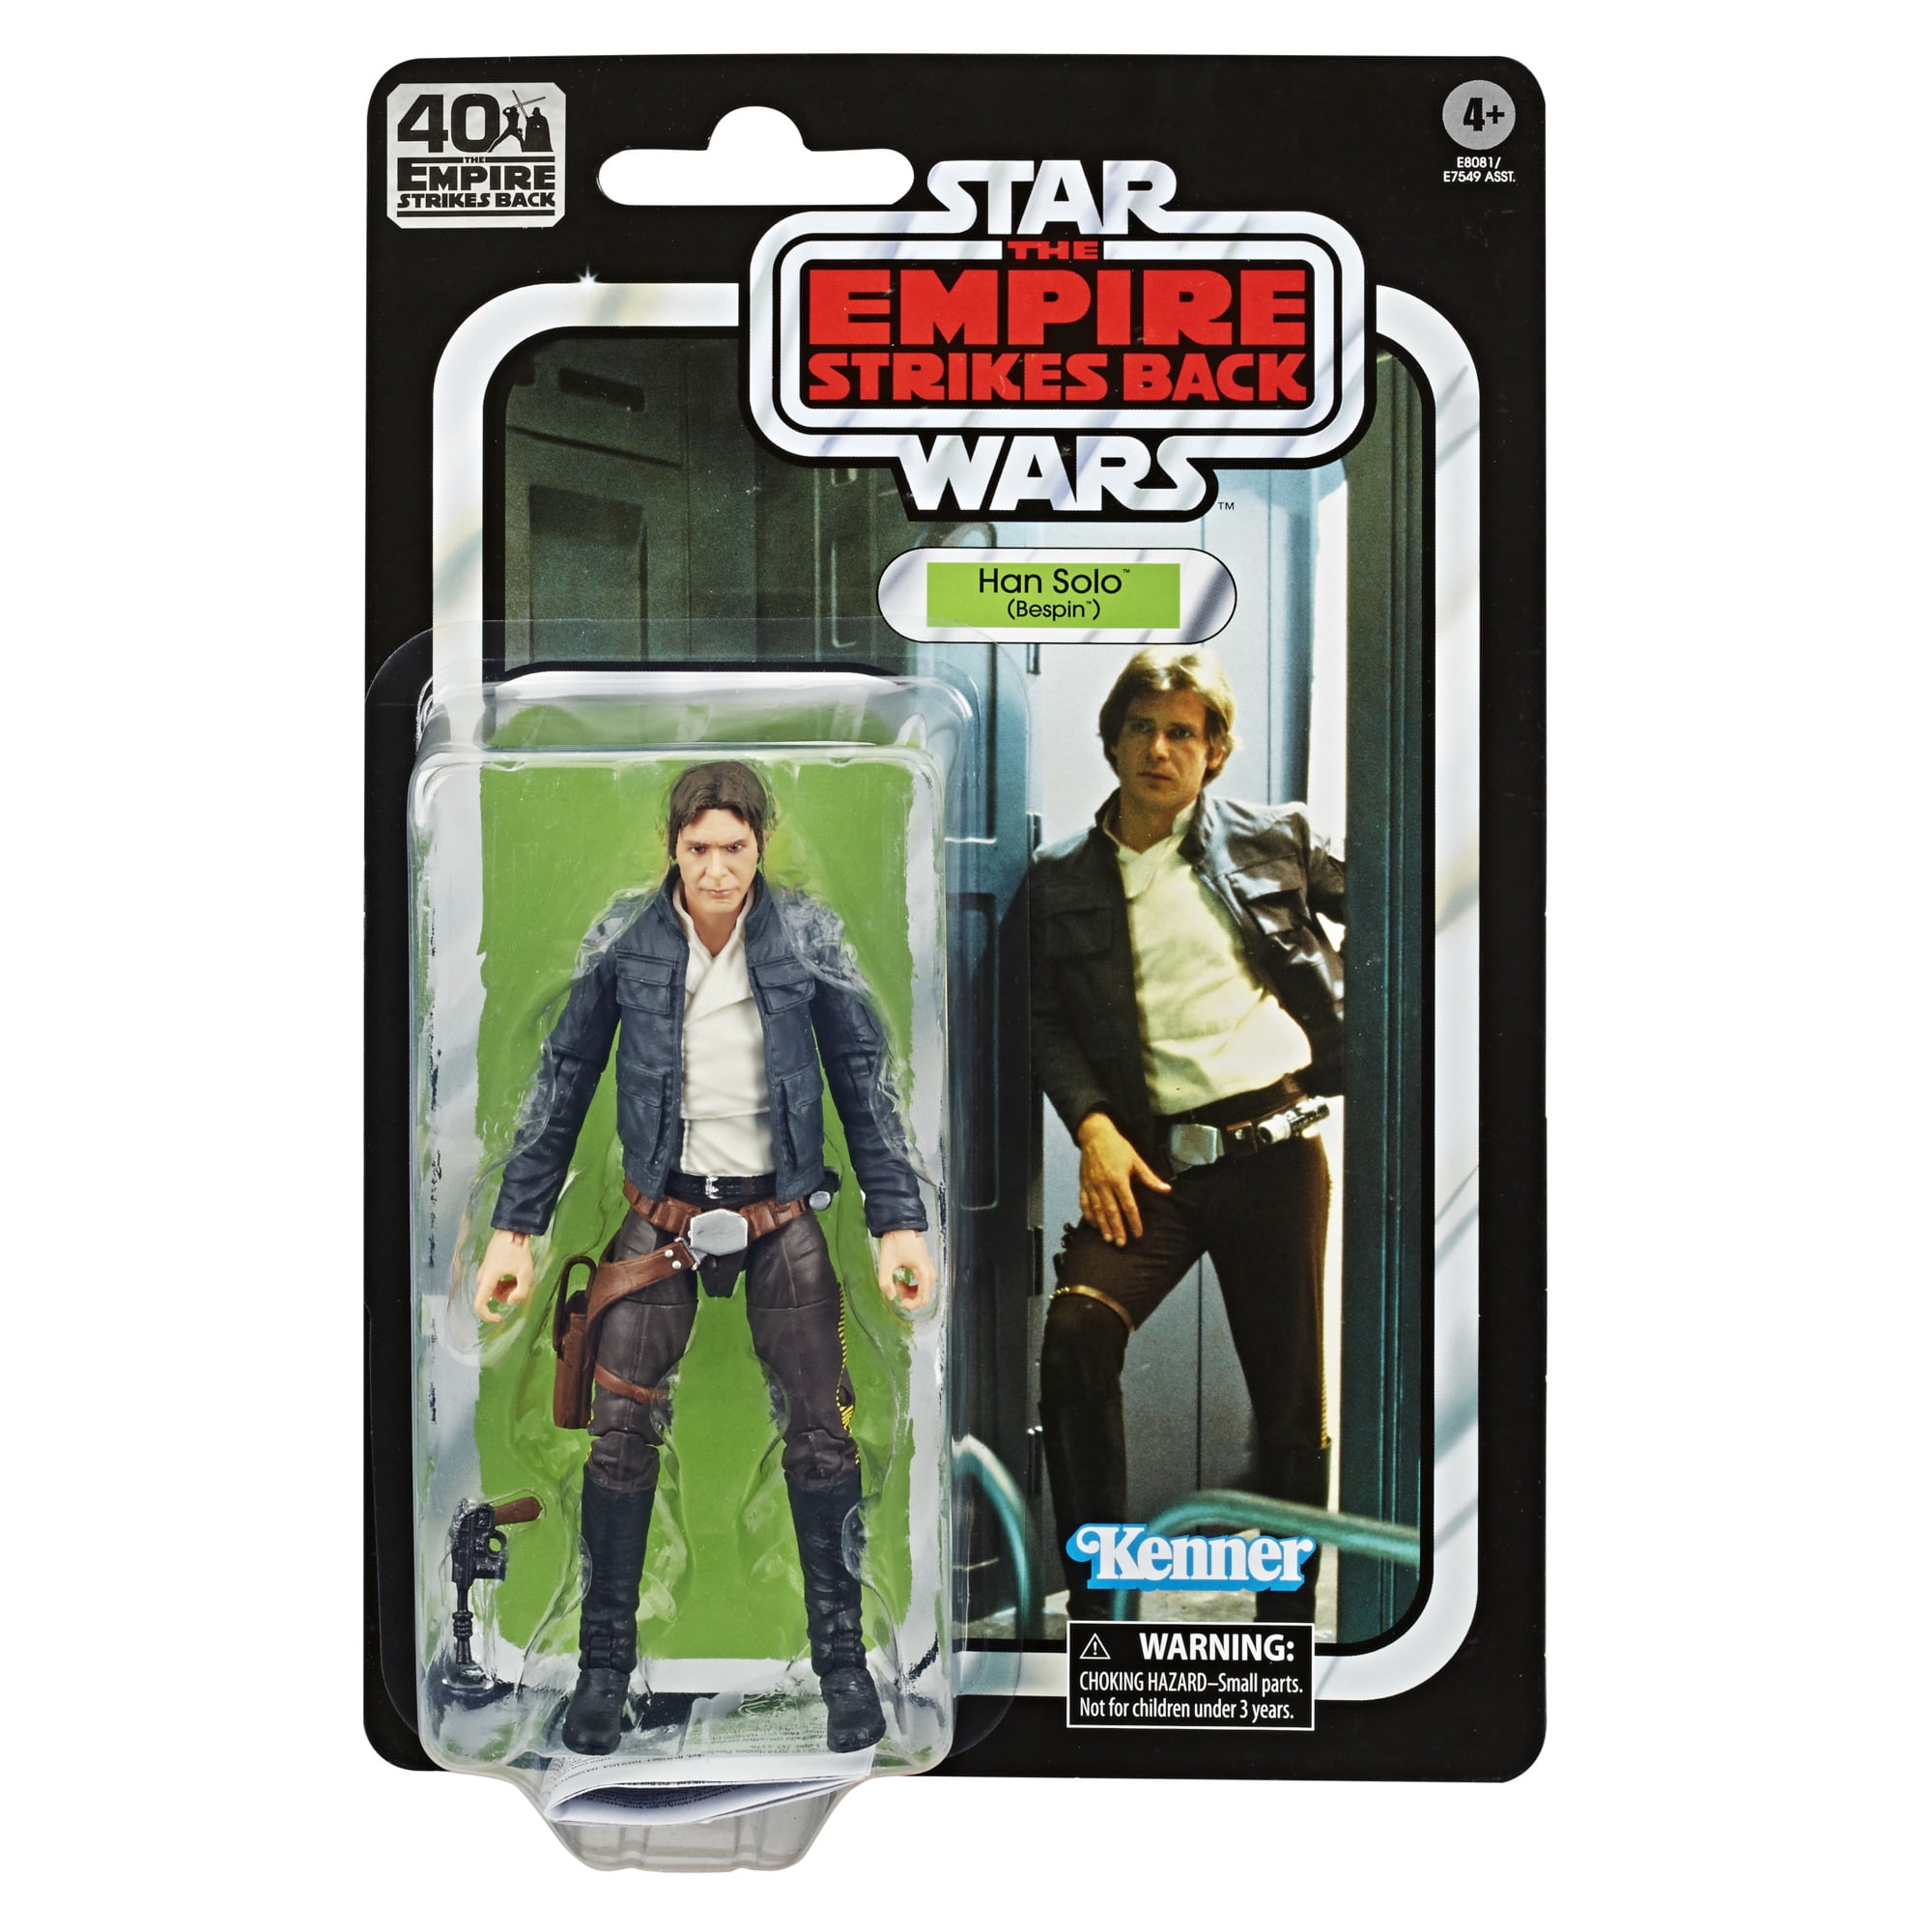 Details about   IN HAND 2019 Star Wars 3.75” Retro Collection Target Kenner HAN SOLO 